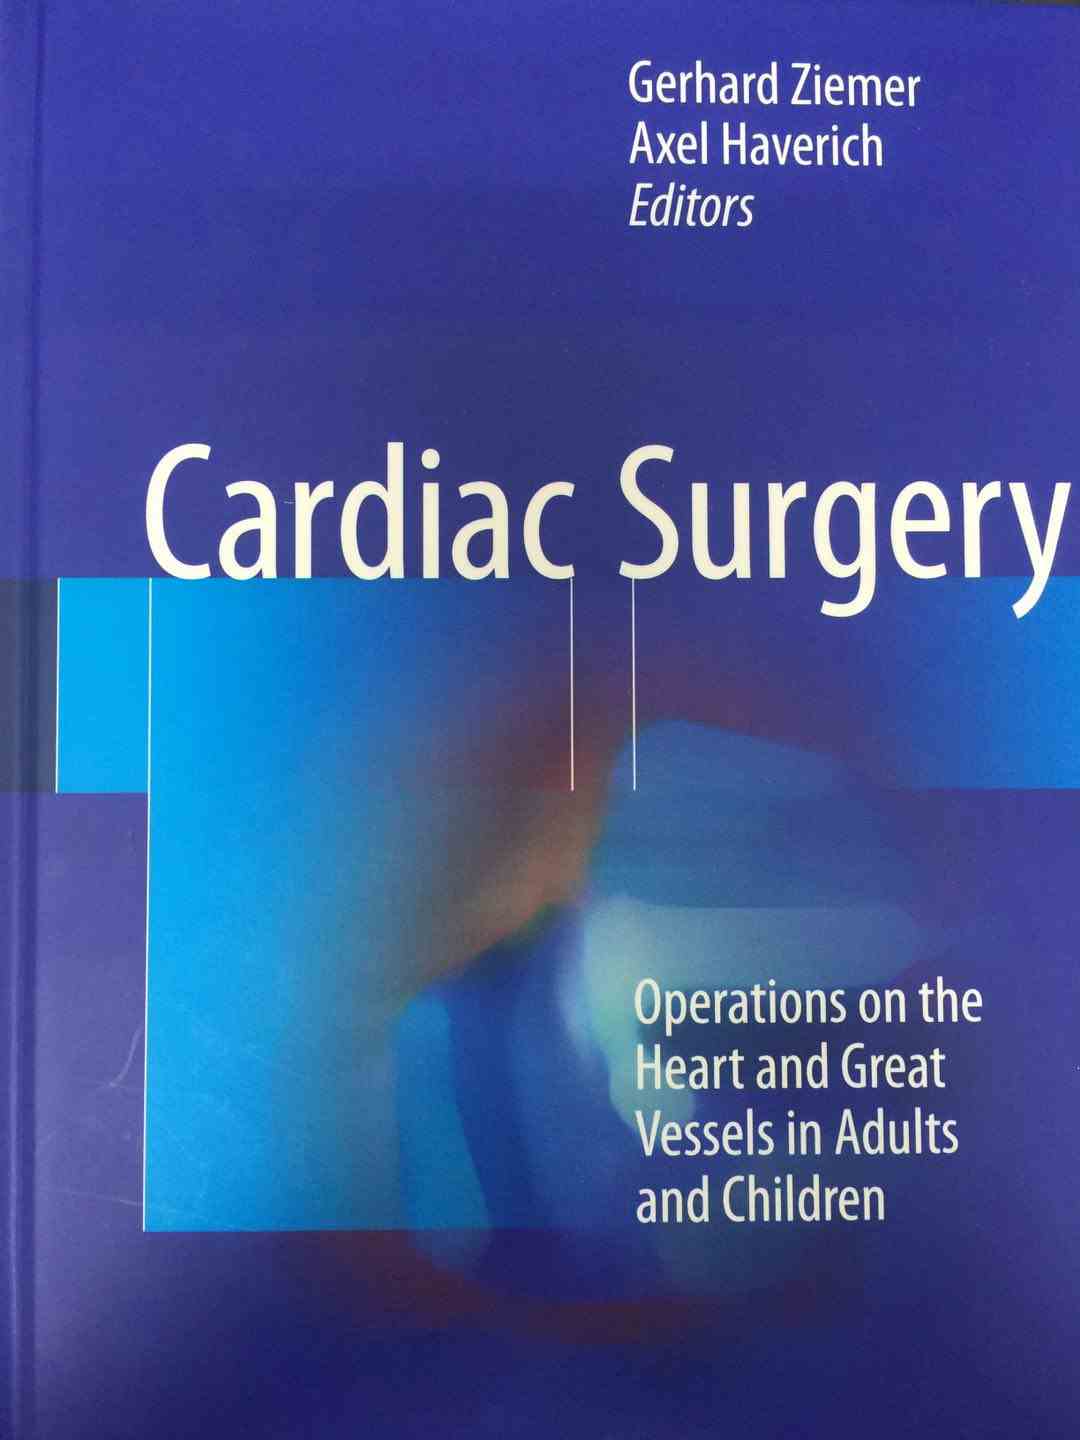 《Cardiac Surgery: Operations on the Heart and Great Vessels in Adults and Children 》